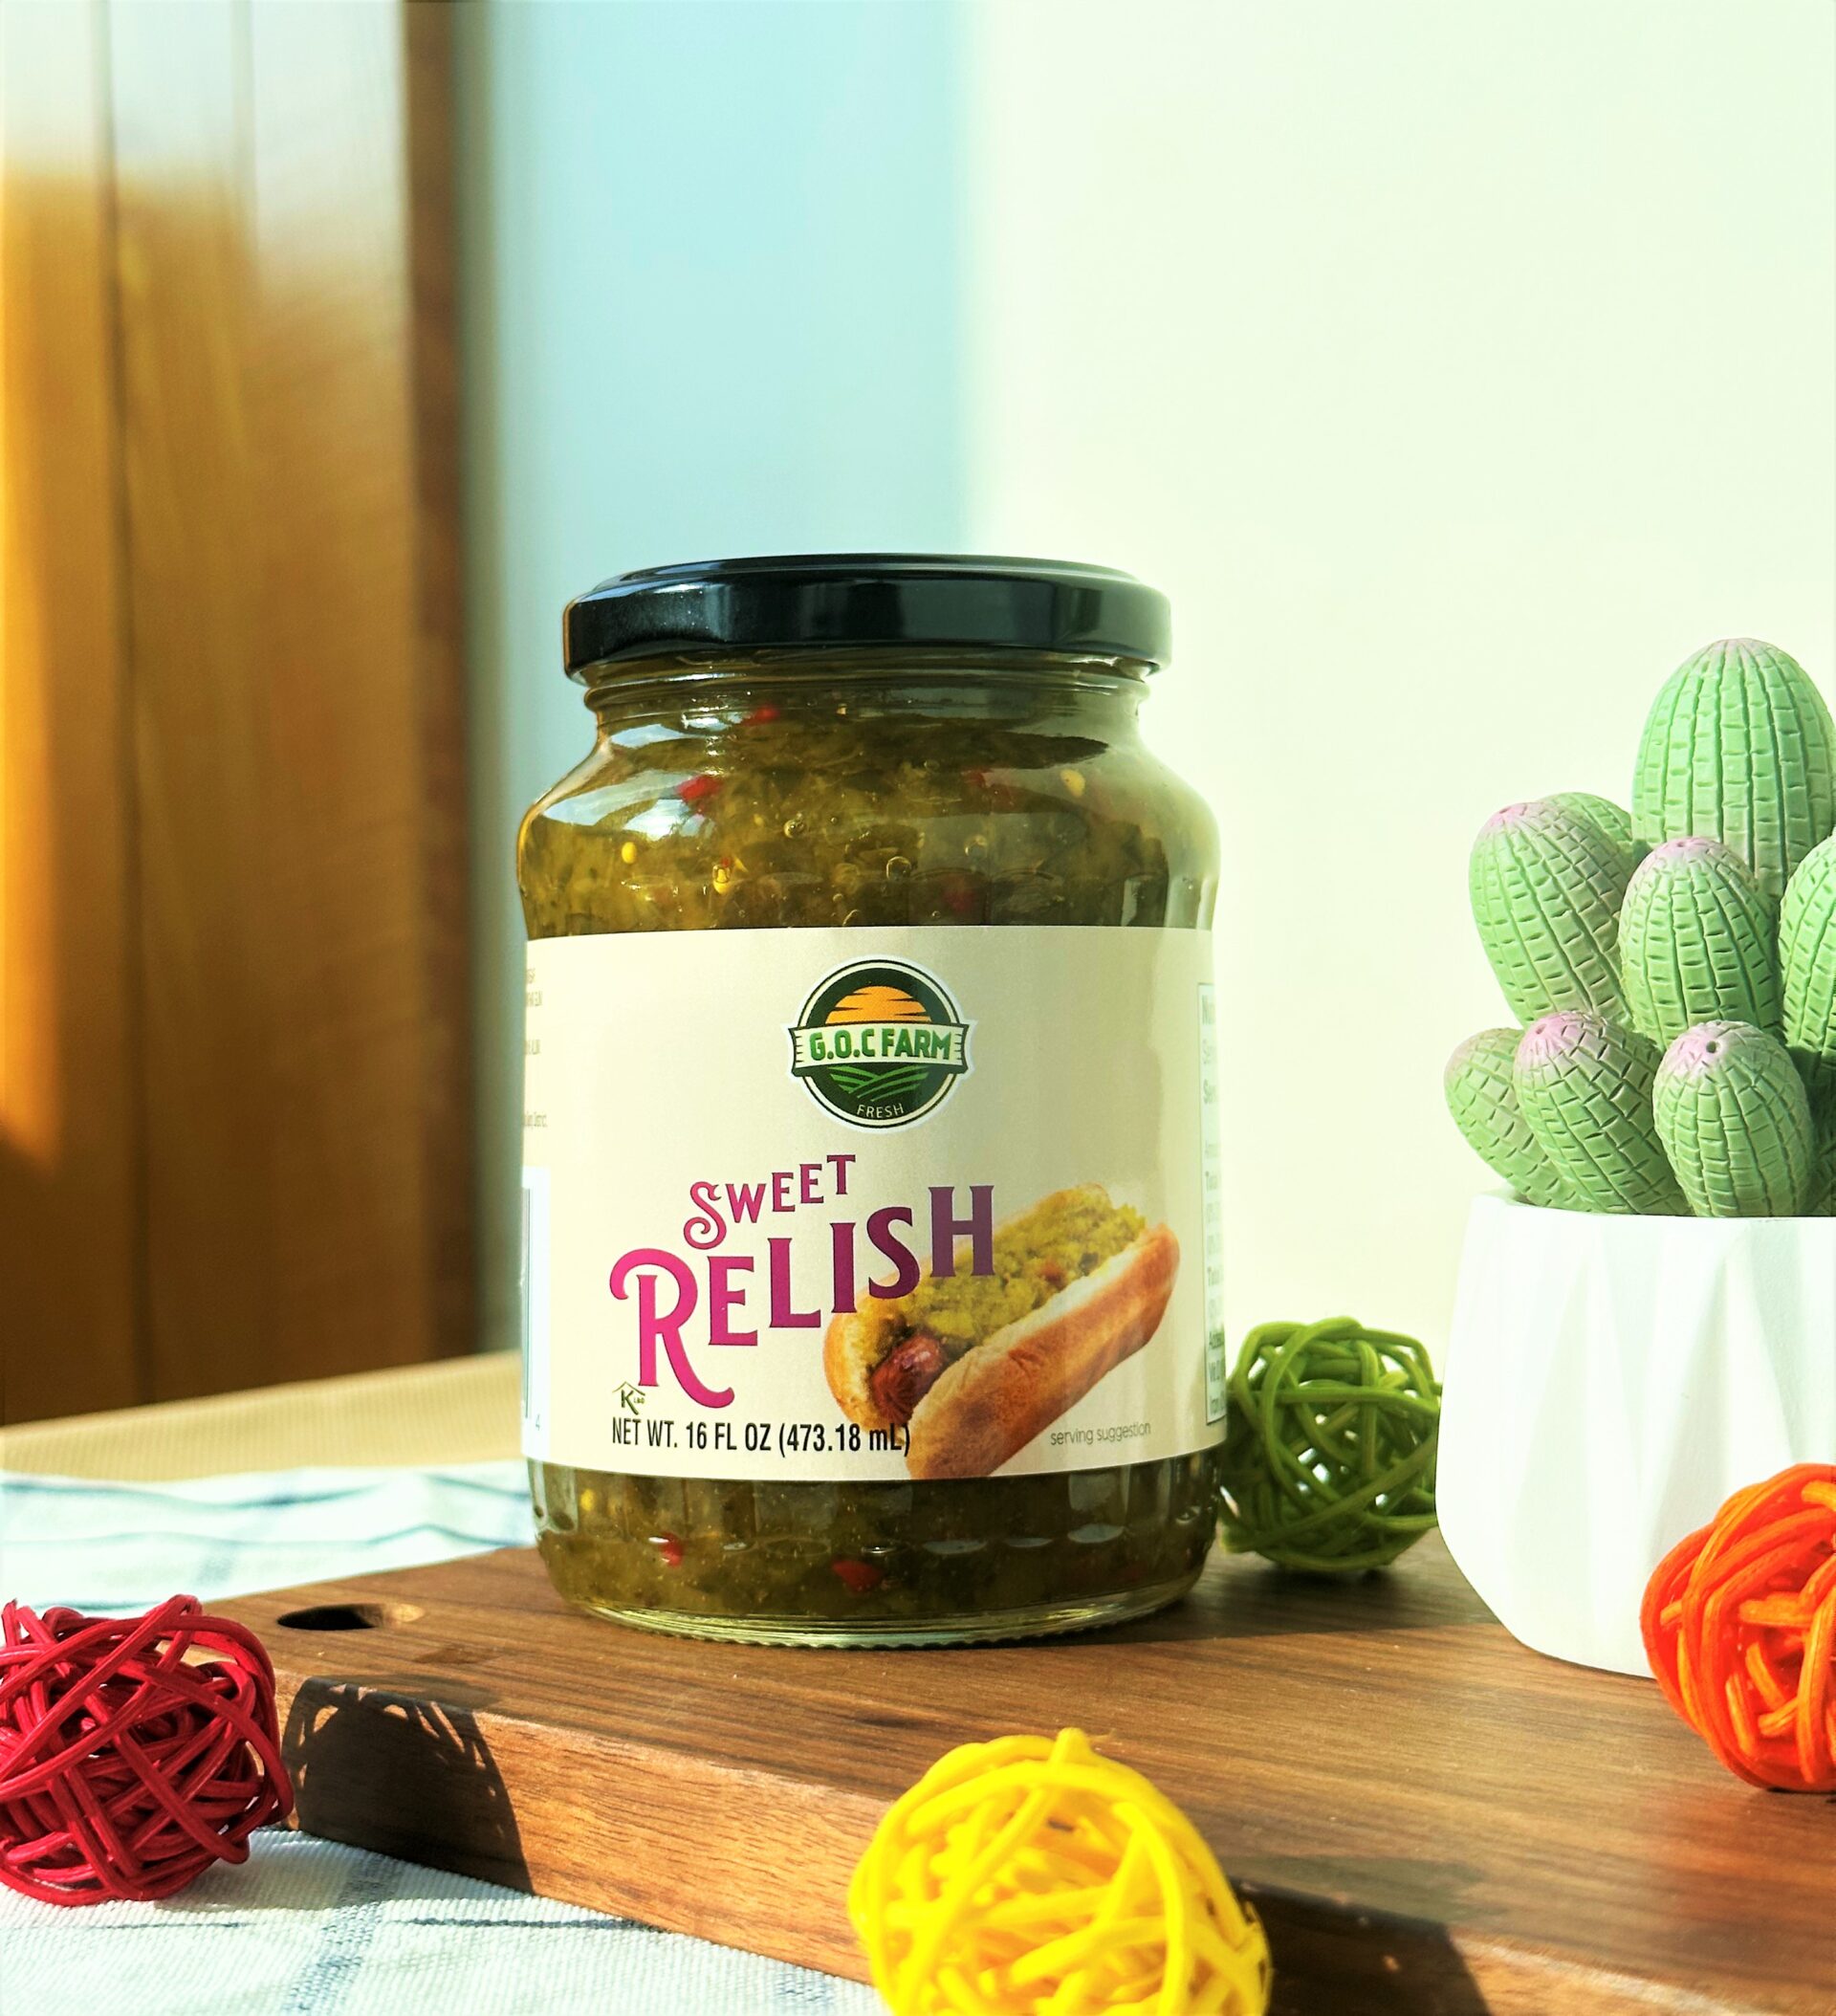 Sweet relish (with sugar) or Dill relish (without sugar)